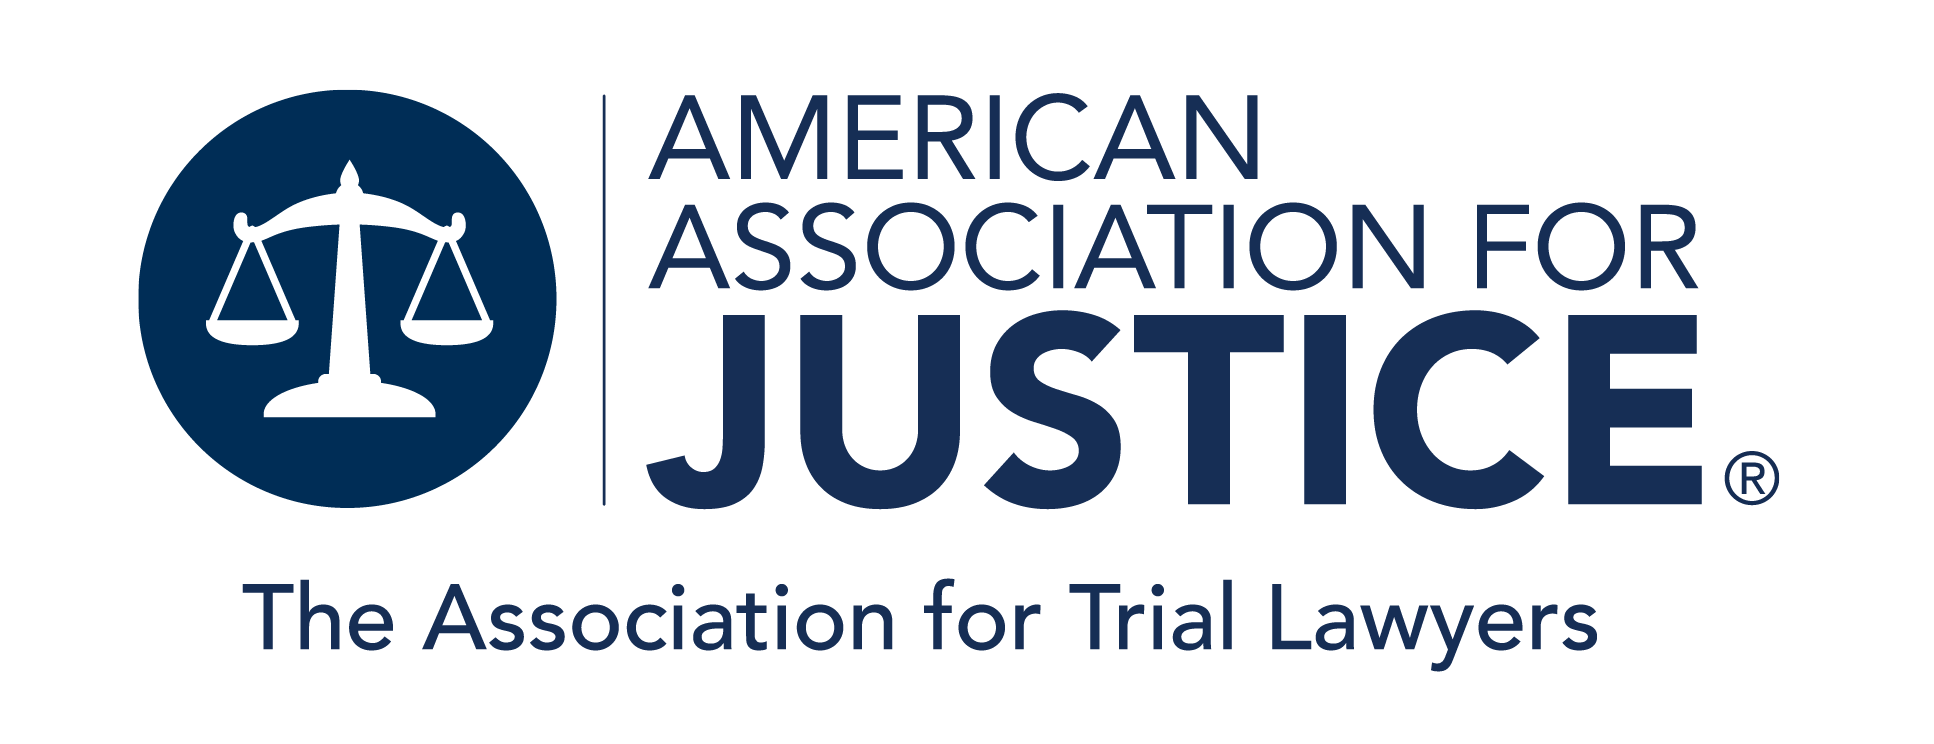 American Association For Justice The Association For Trial Lawyers